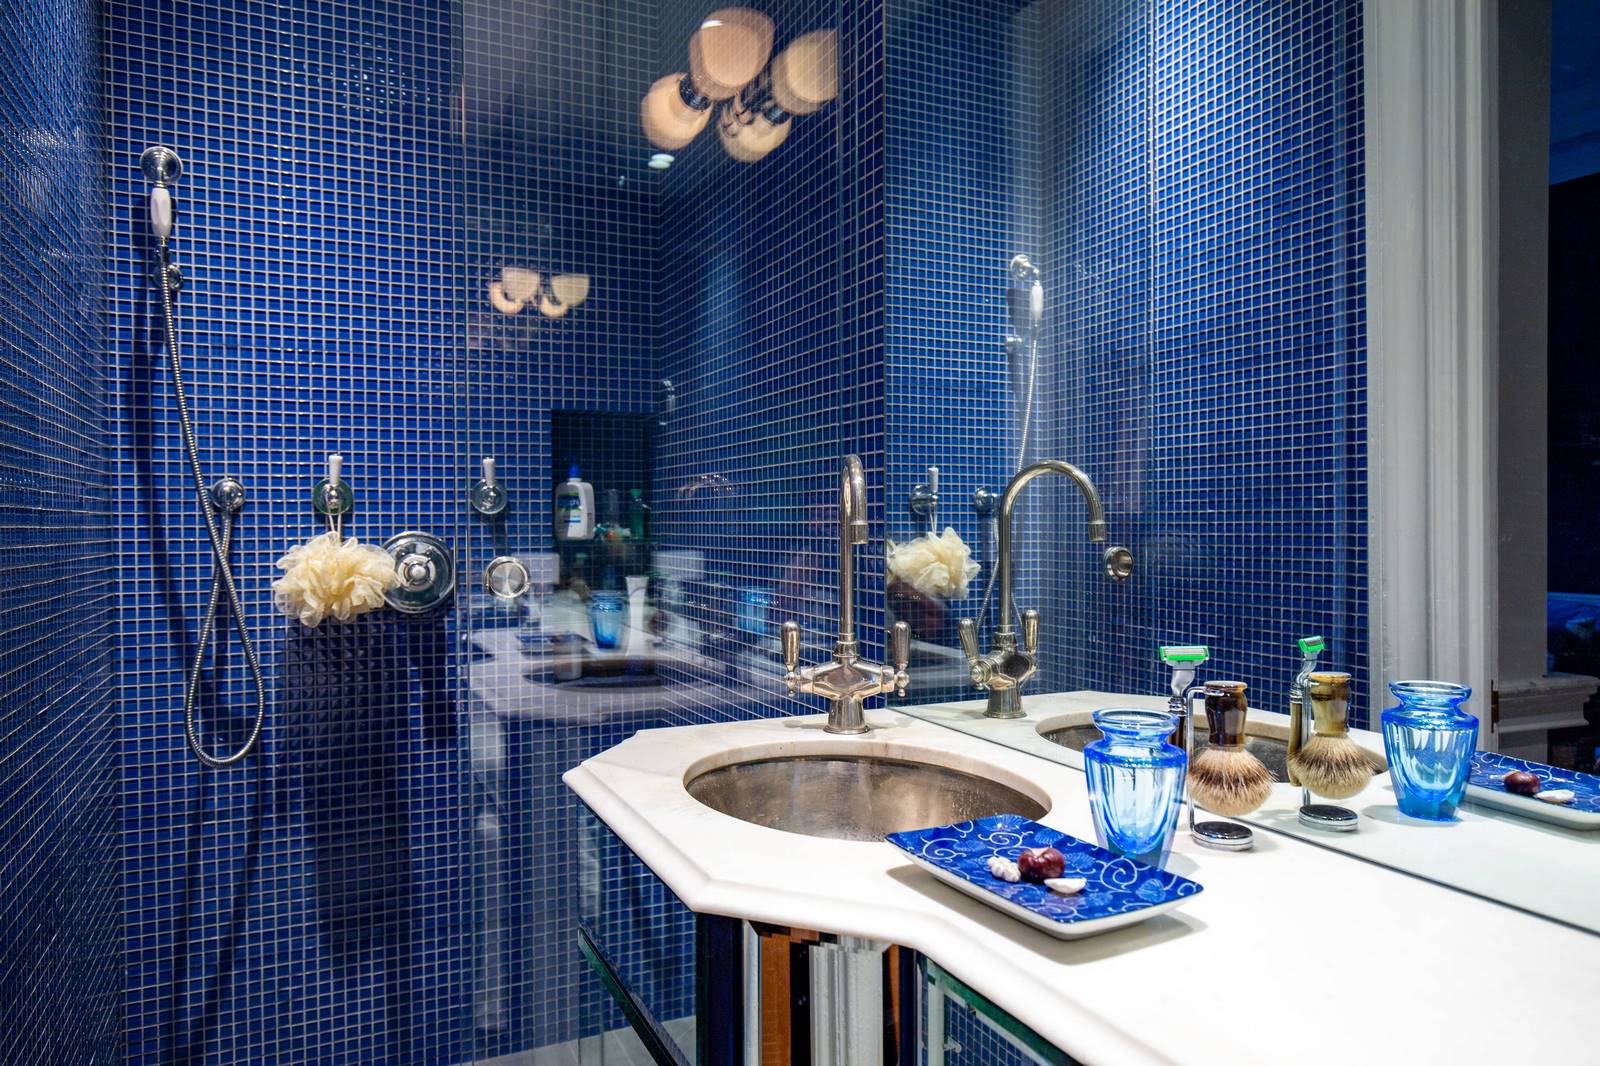 The blue walls in this bathroom perfectly match the water traditionally associated with blue. The yellow fixtures look great against blue wall backgrounds. The central elements of this composition - the countertops and the pedestal sink - are highlighted in white, which is considered universal. Indeed, white is in perfect harmony with both blue walls and yellow lamps. Dreaming of the perfect bathroom? Then elevate its interior design with our outstanding interior designers!